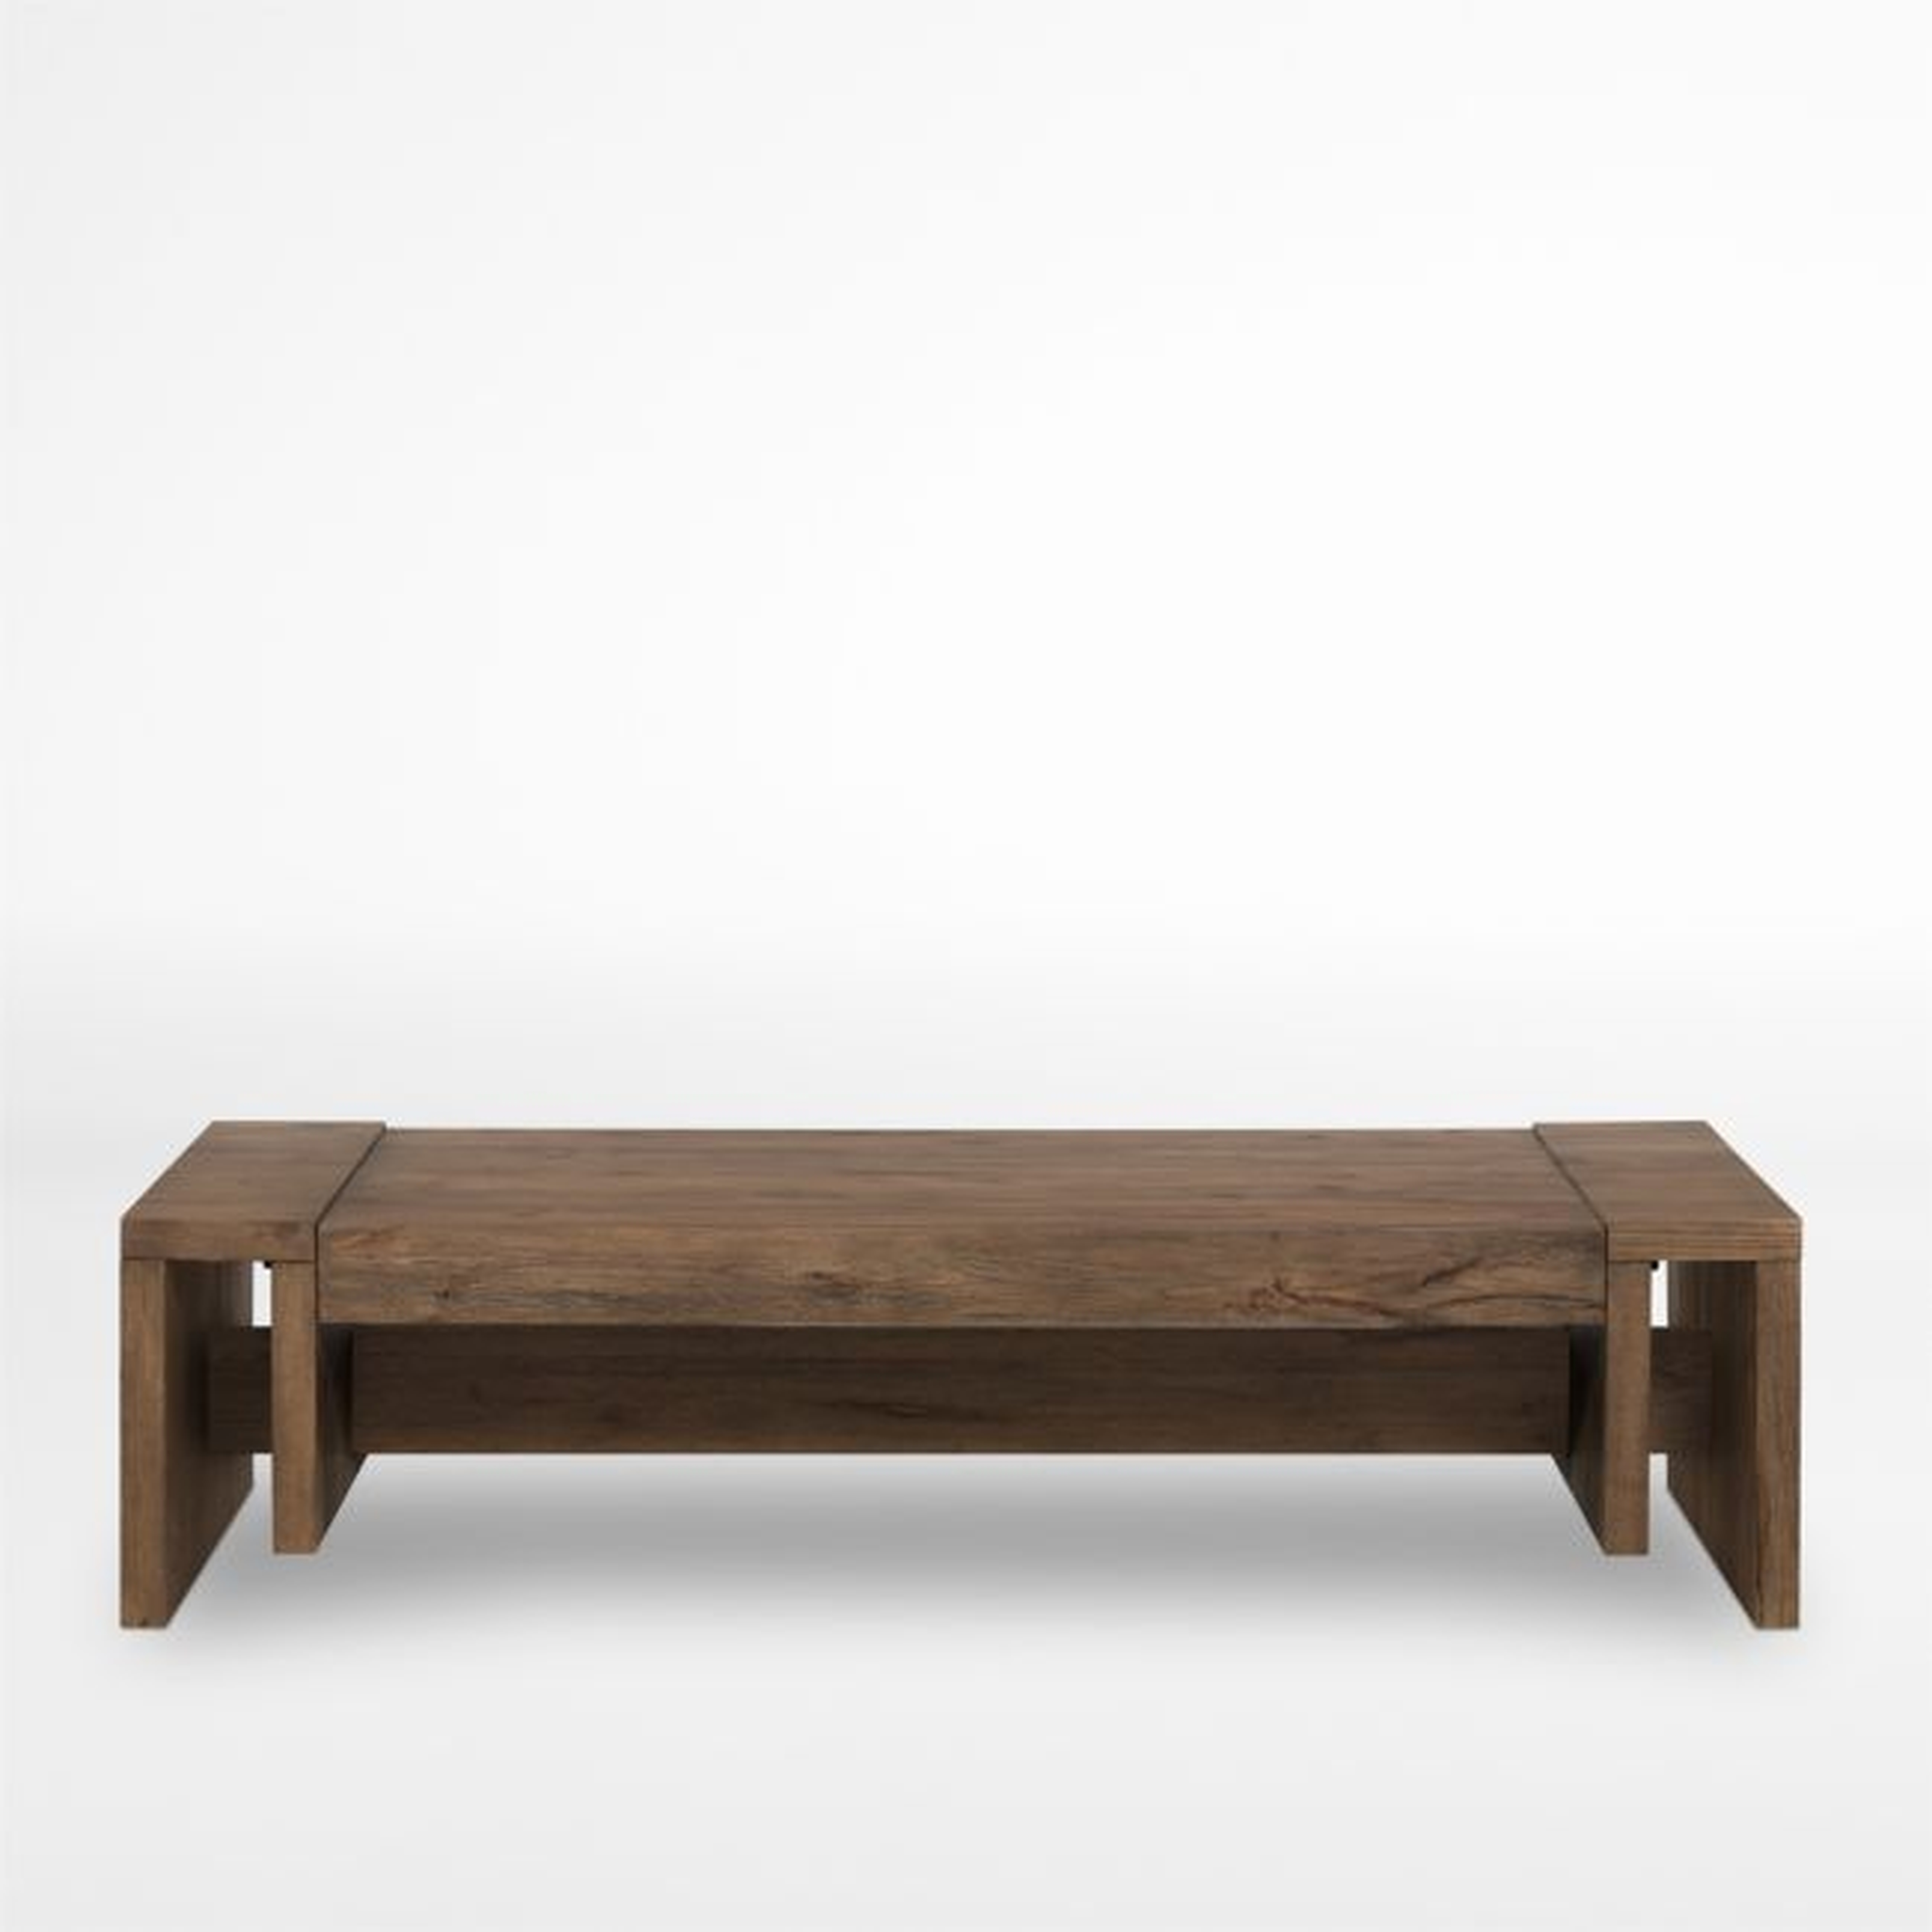 Cleave Oak Wood Coffee Table - Crate and Barrel